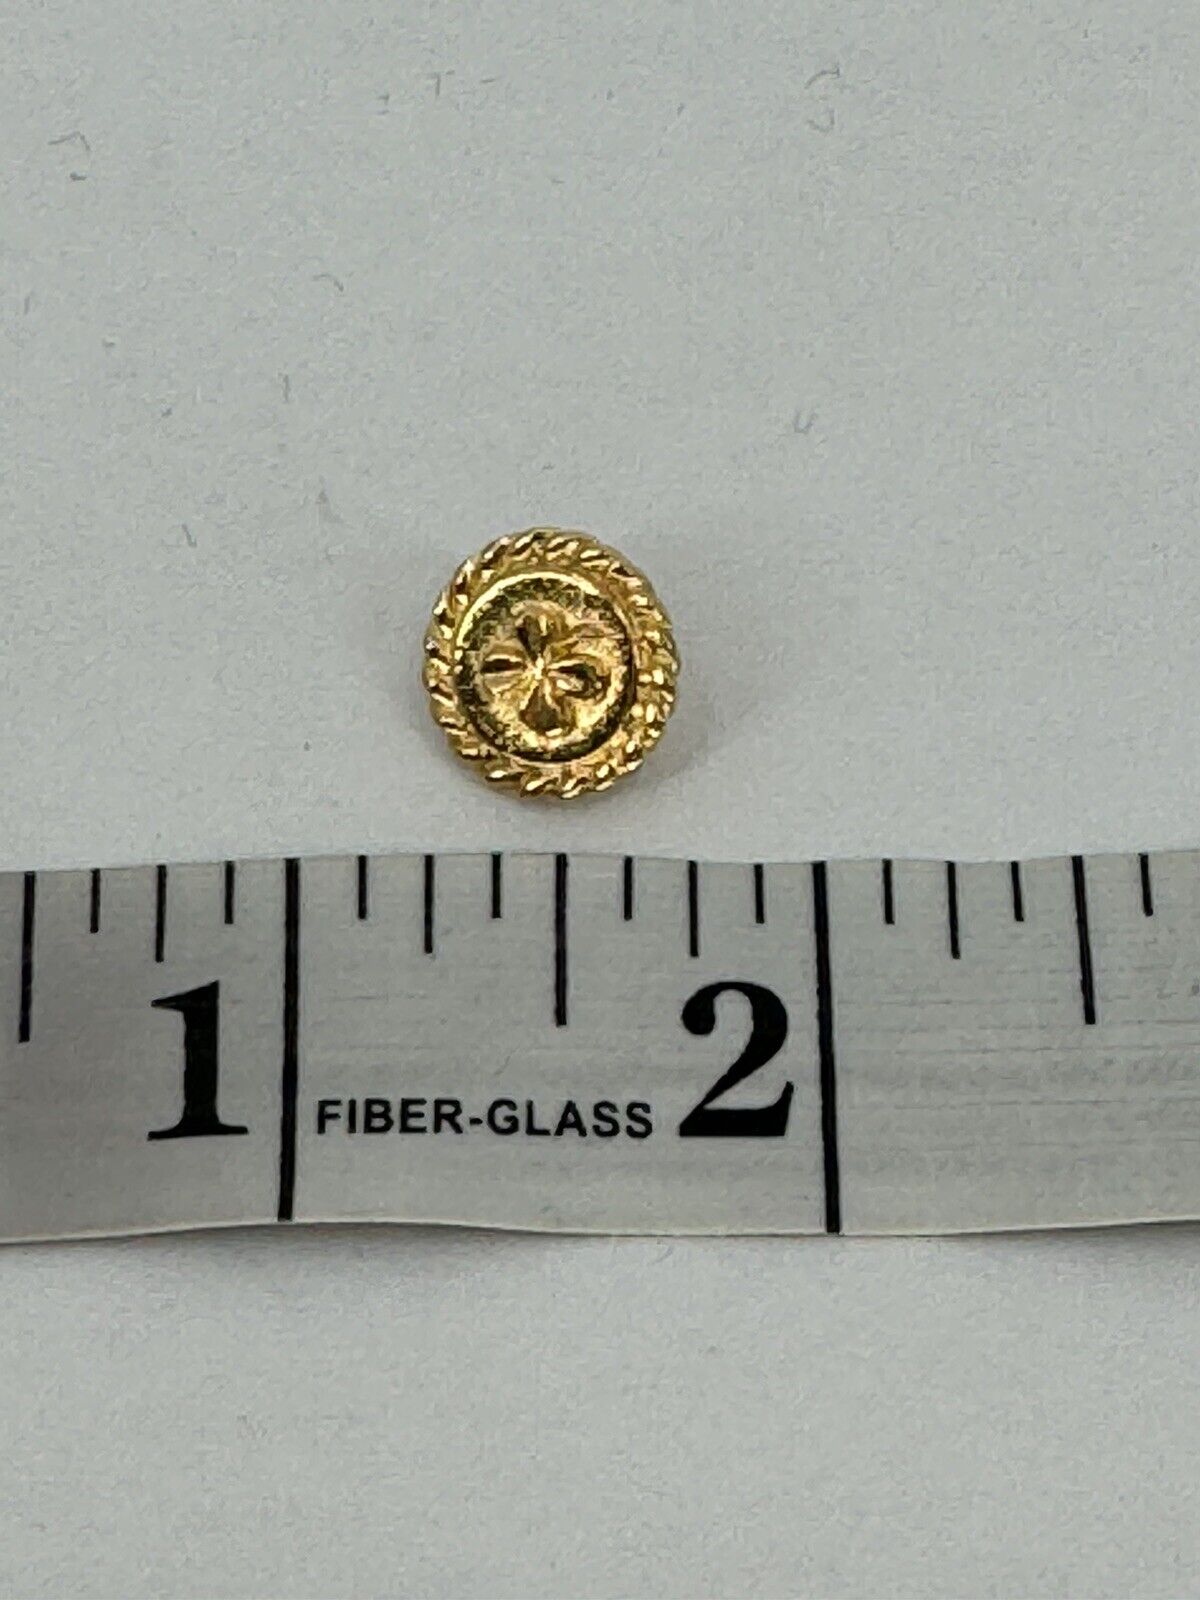 Chanel Button Vintage 4 Leaf Clover Button Gold Tone Perfect Condition